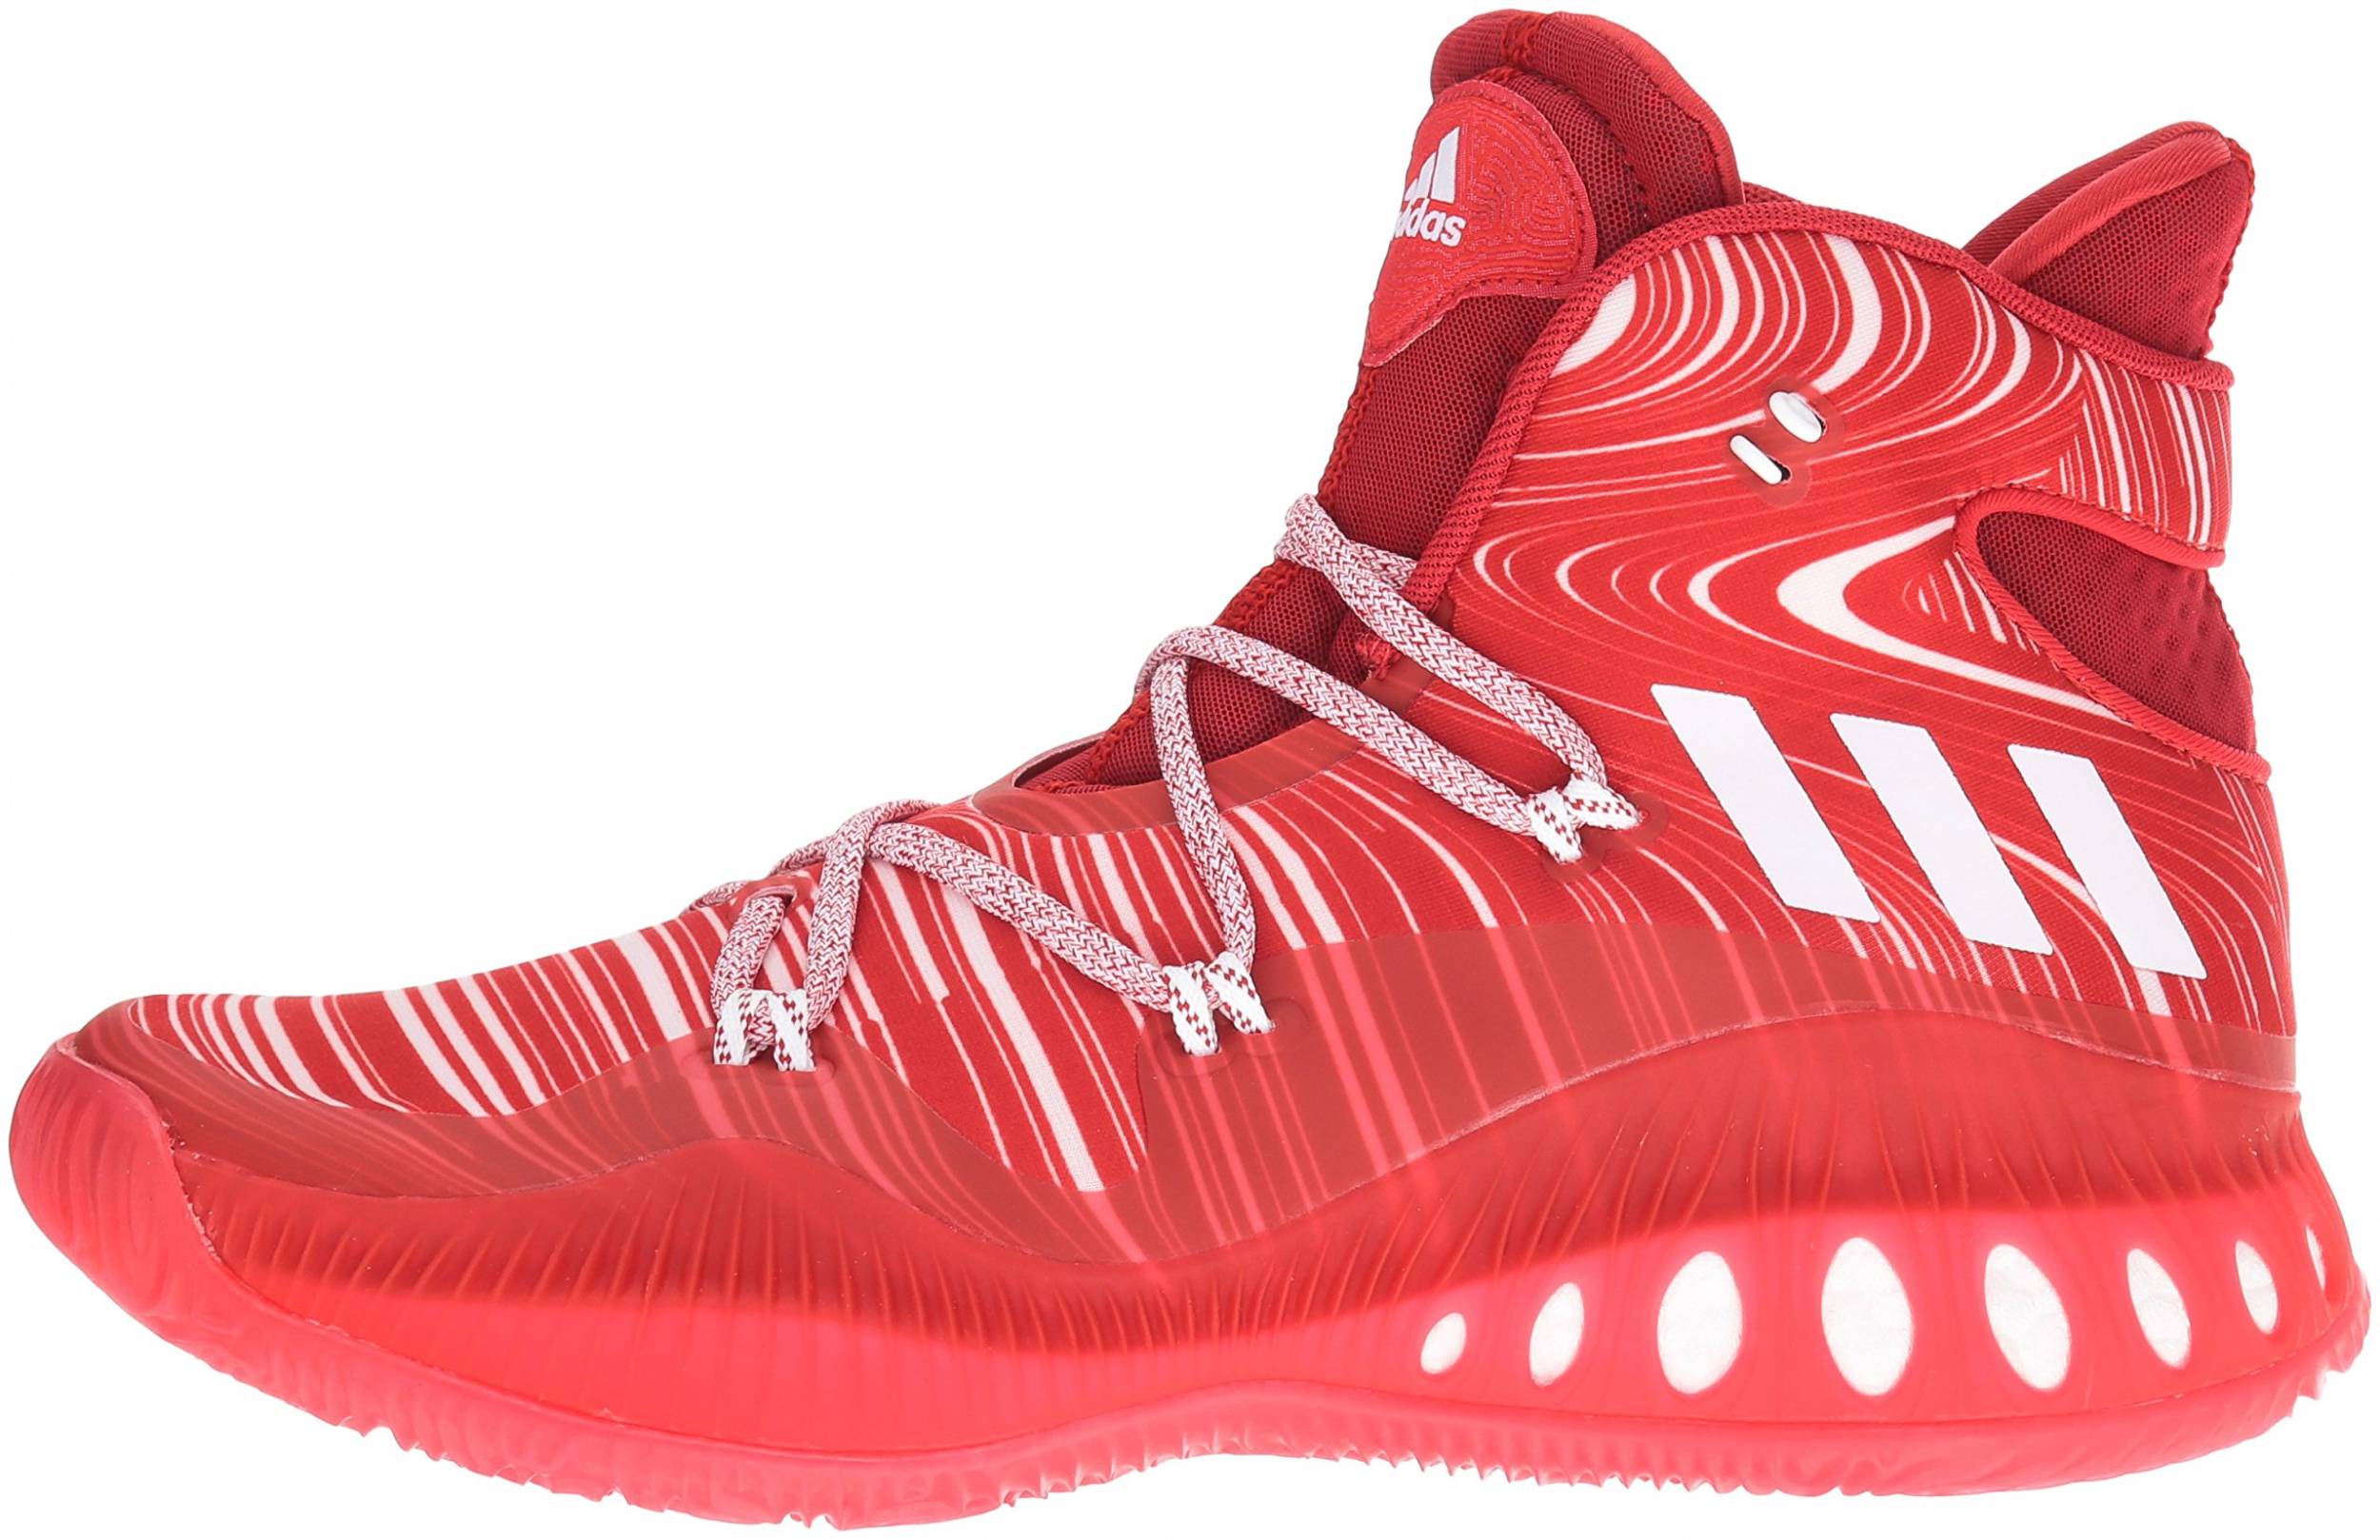 Save 30% on Red Basketball Shoes (107 